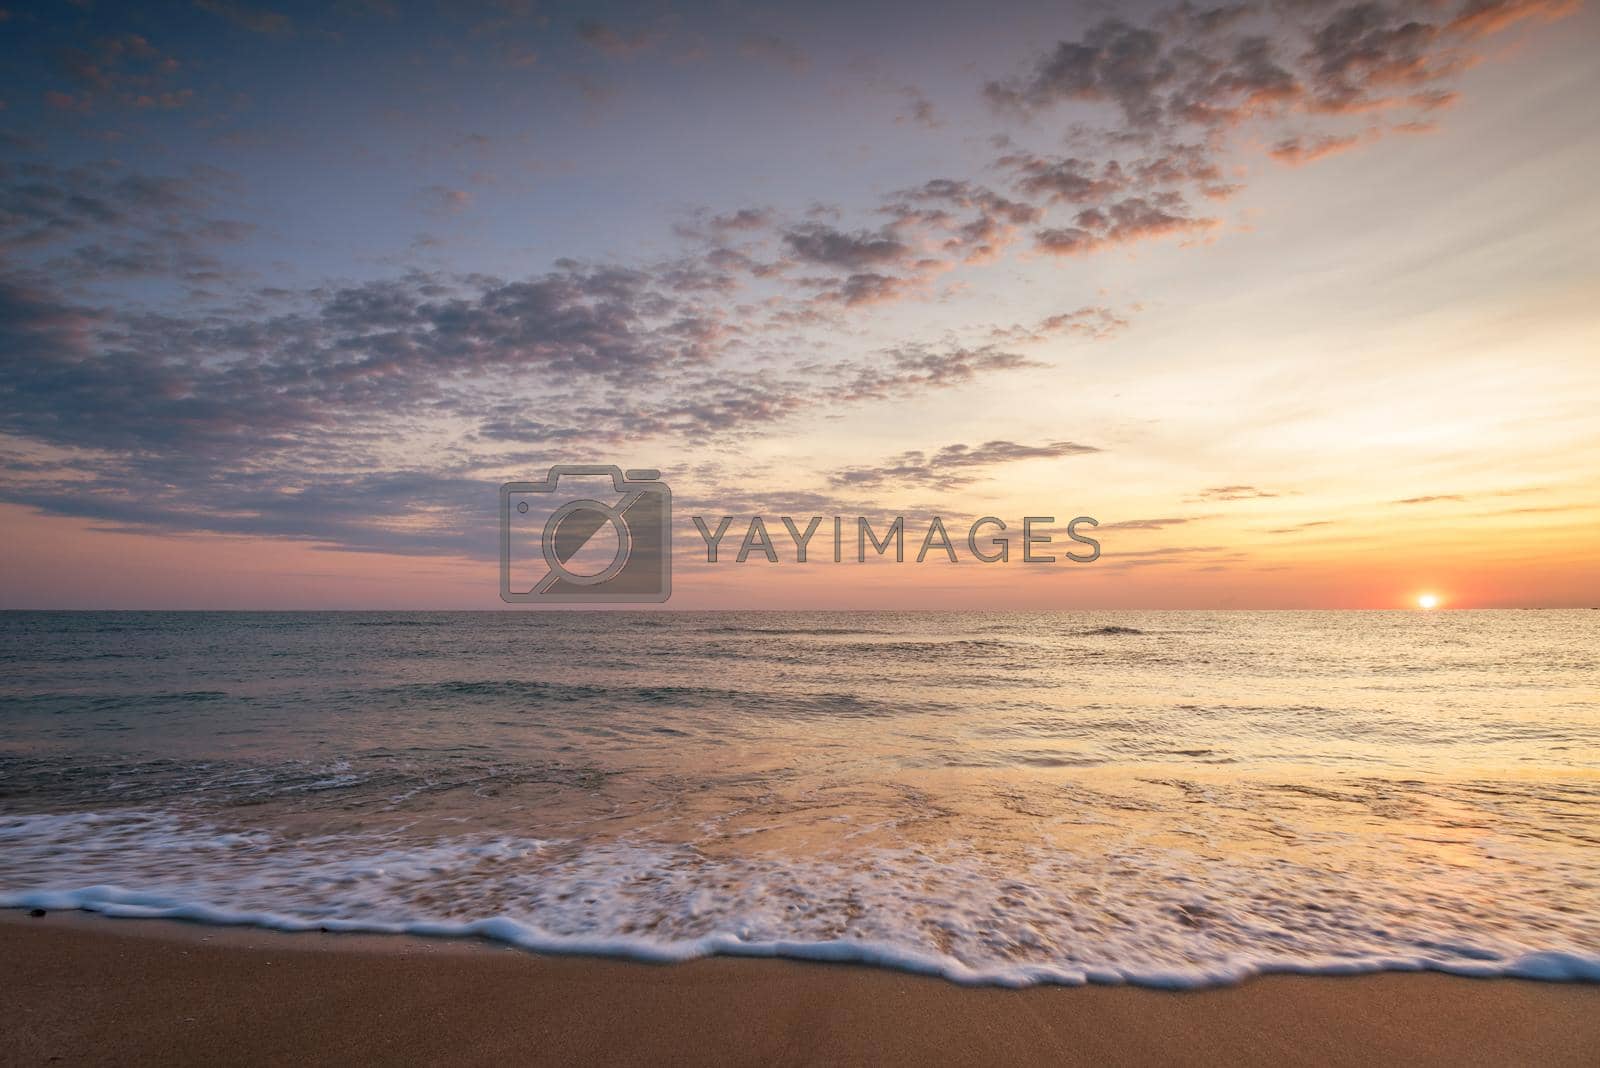 Royalty free image of Beautiful tropical sunrise on the beach by ba11istic